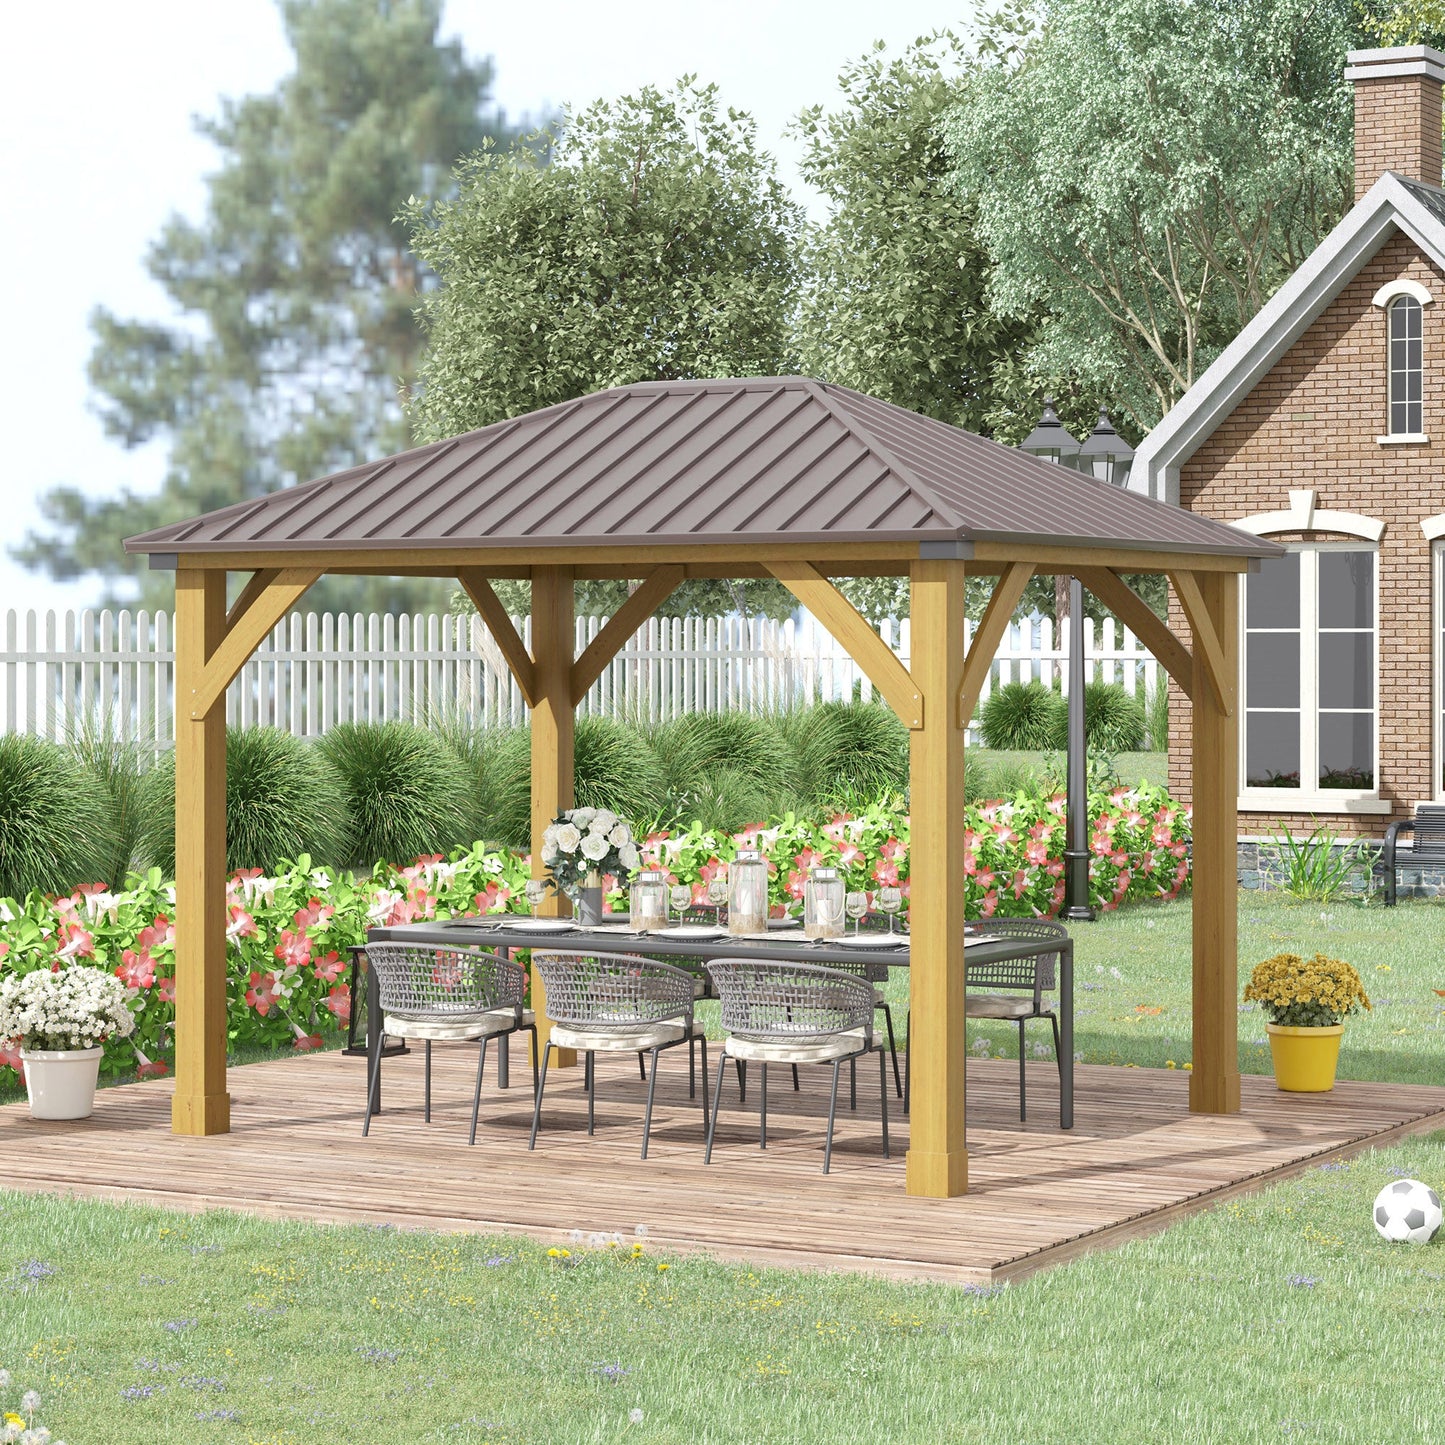 Outdoor and Garden-10x12 Galvanized Steel Gazebo with Wooden Frame, Permanent Metal Roof Gazebo Canopy for Garden, Patio, Backyard, Brown - Outdoor Style Company